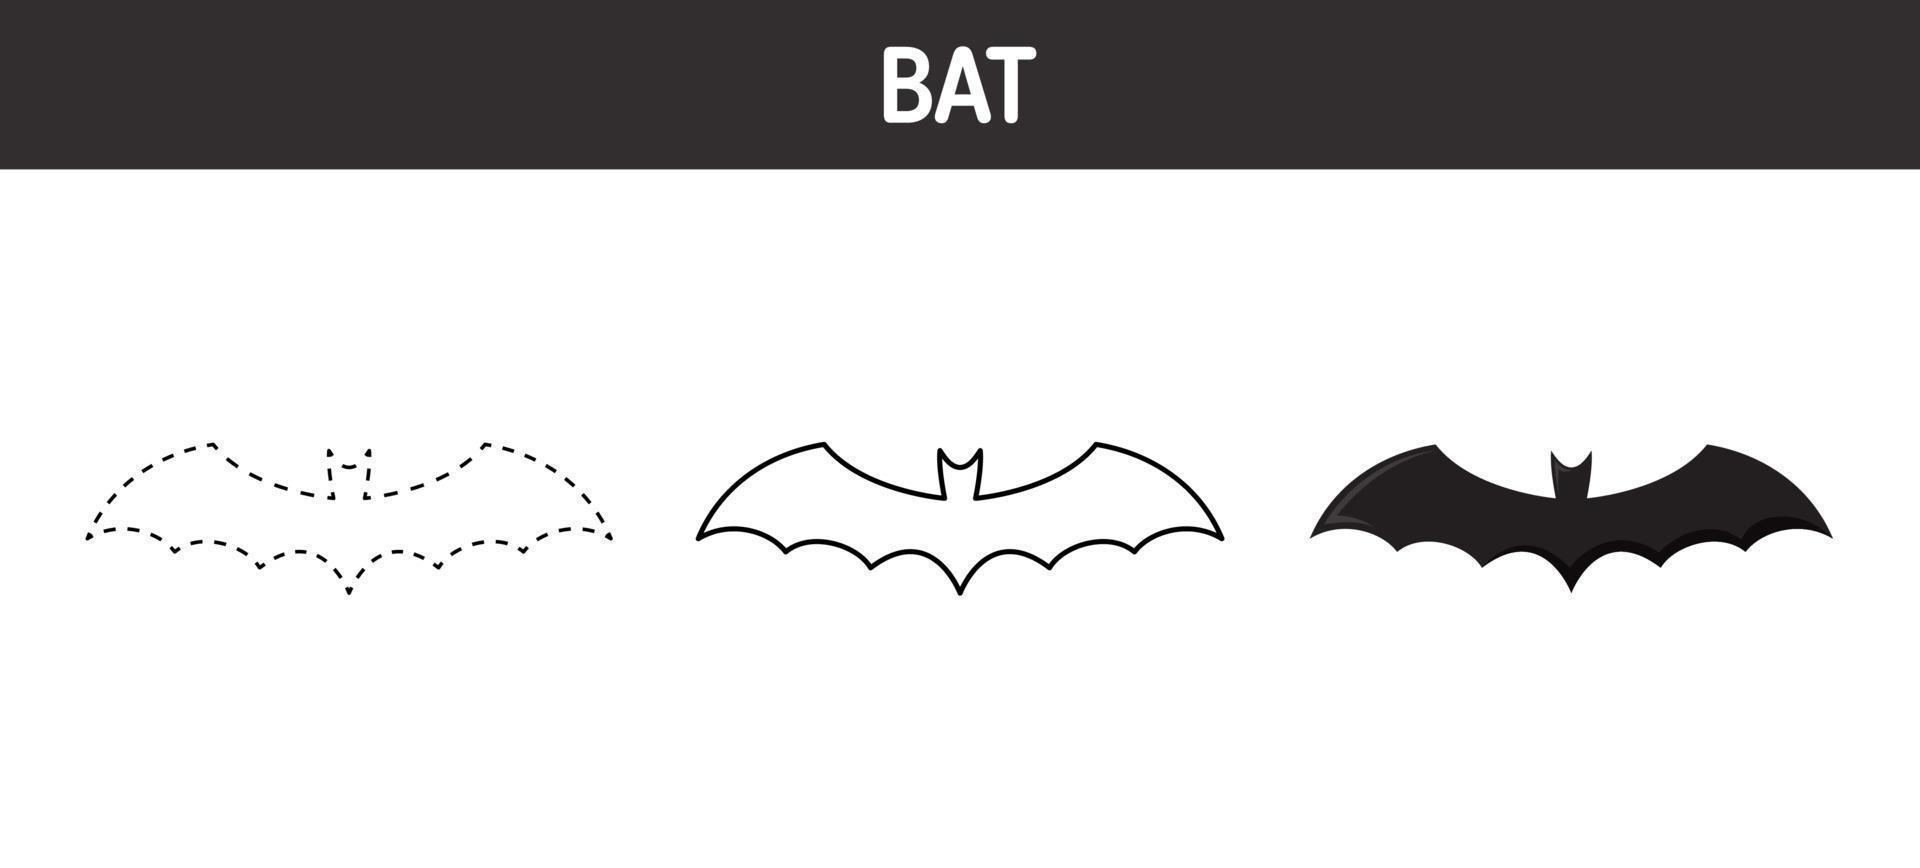 Bat tracing and coloring worksheet for kids vector